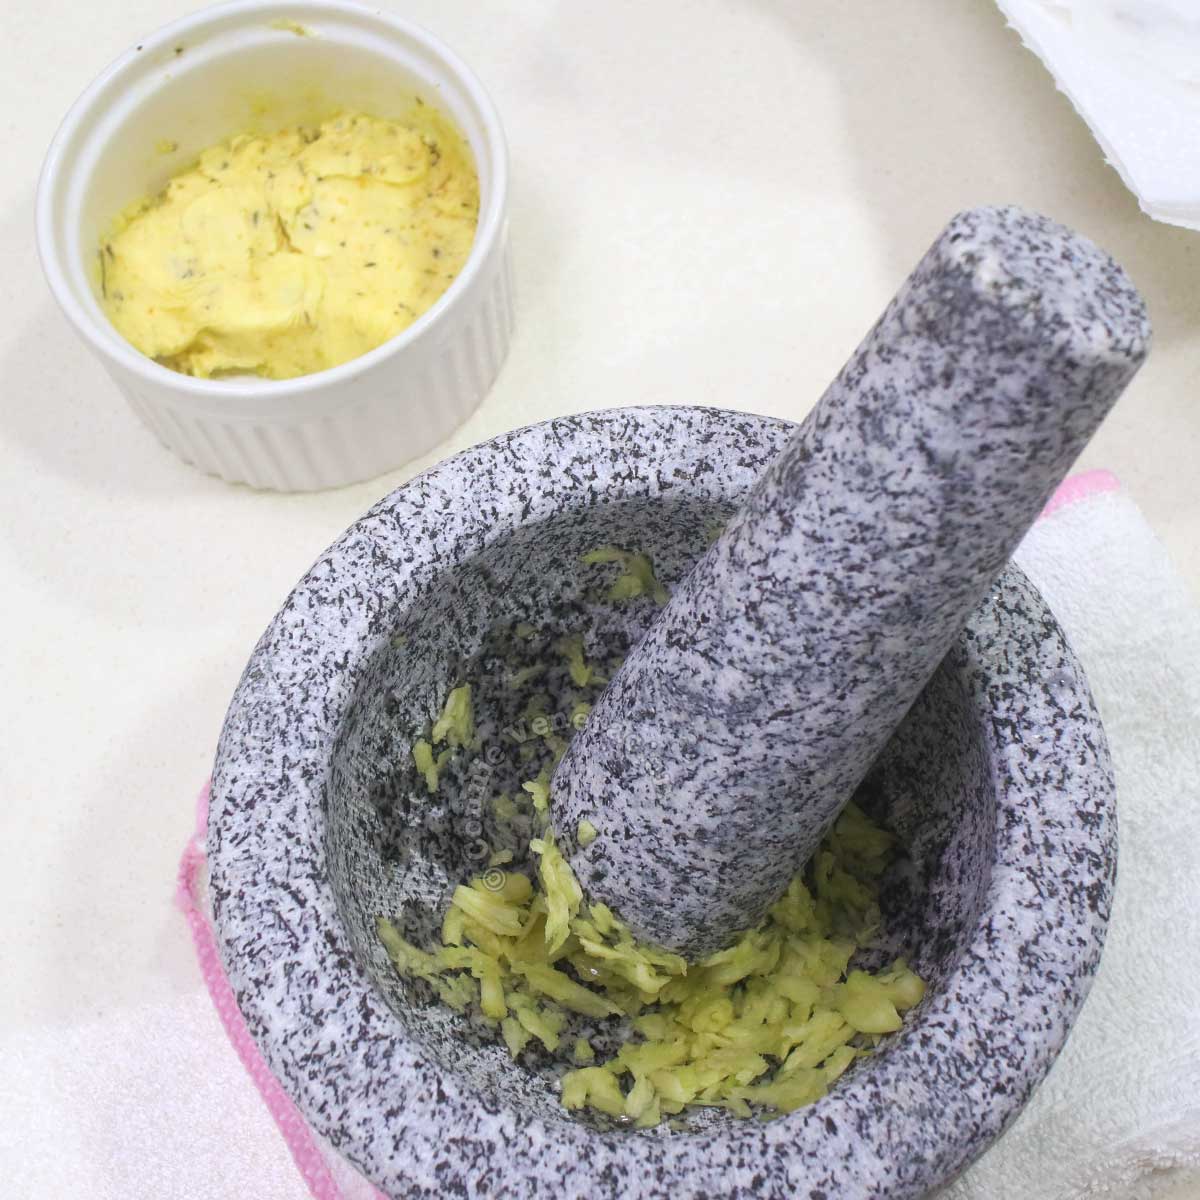 Mortar and pestle made of unpolished granite